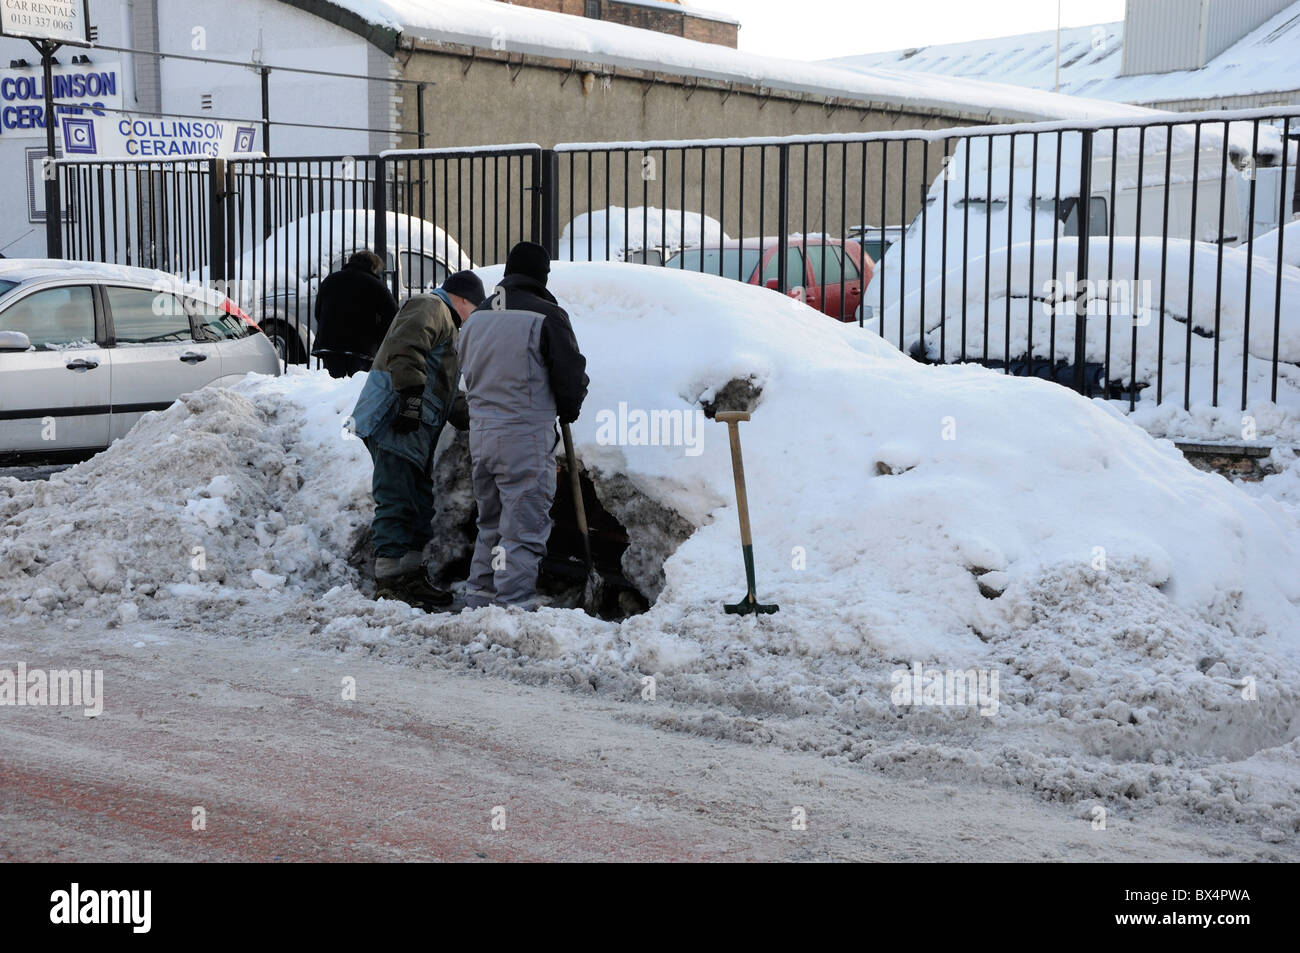 Two men dig out a car in Edinburgh that has been buried in snow during the severe winter of 2010 Stock Photo